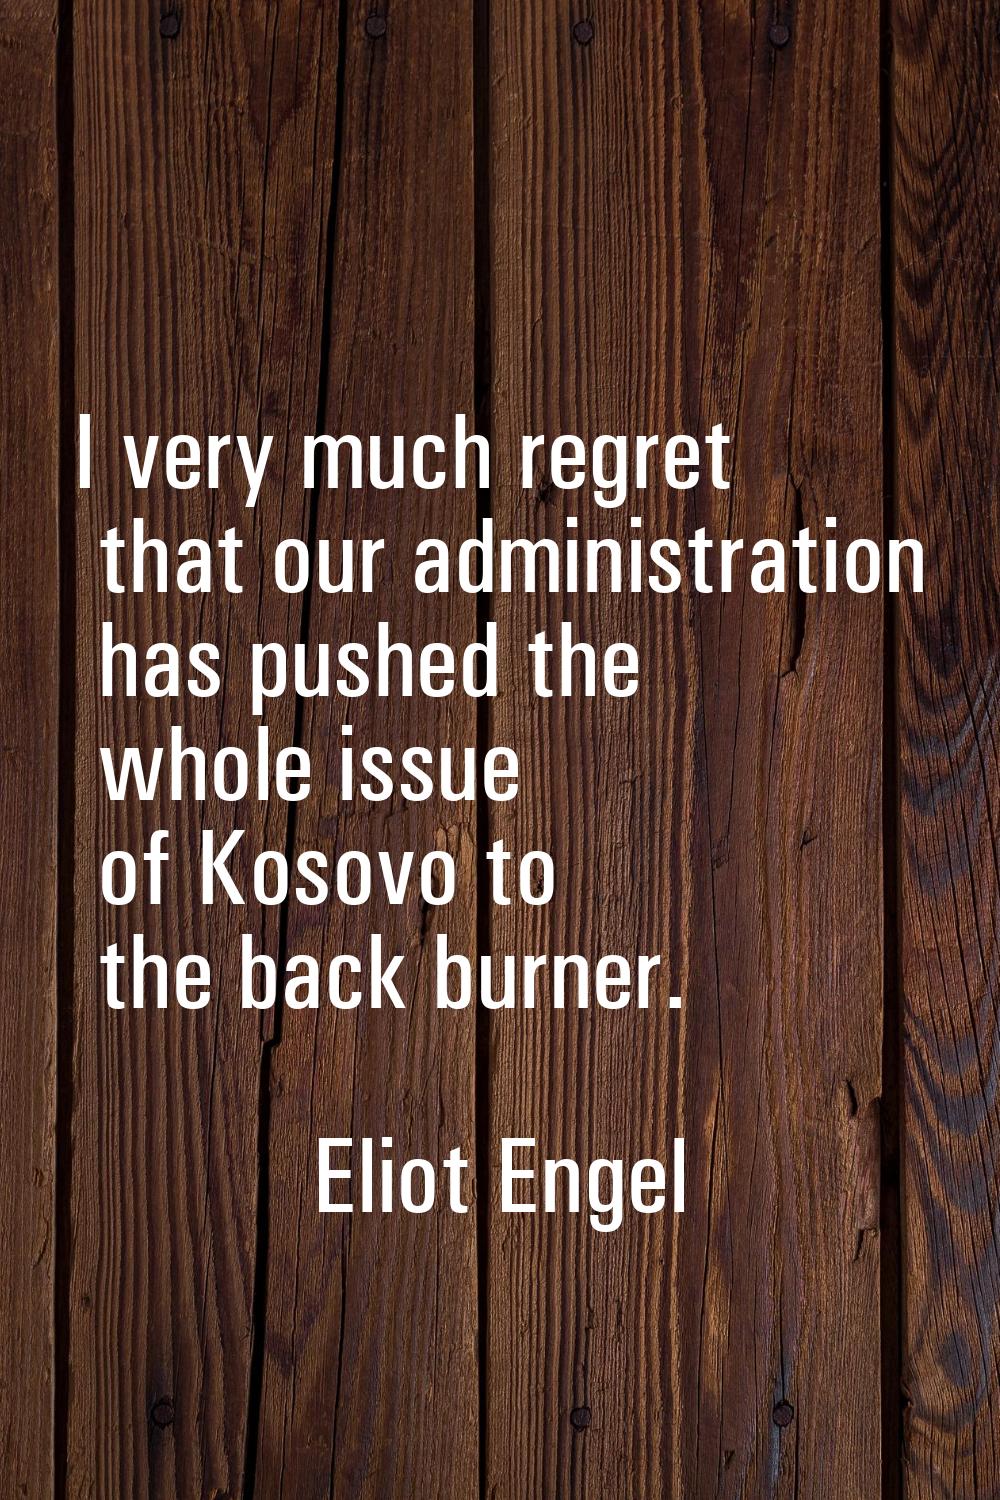 I very much regret that our administration has pushed the whole issue of Kosovo to the back burner.